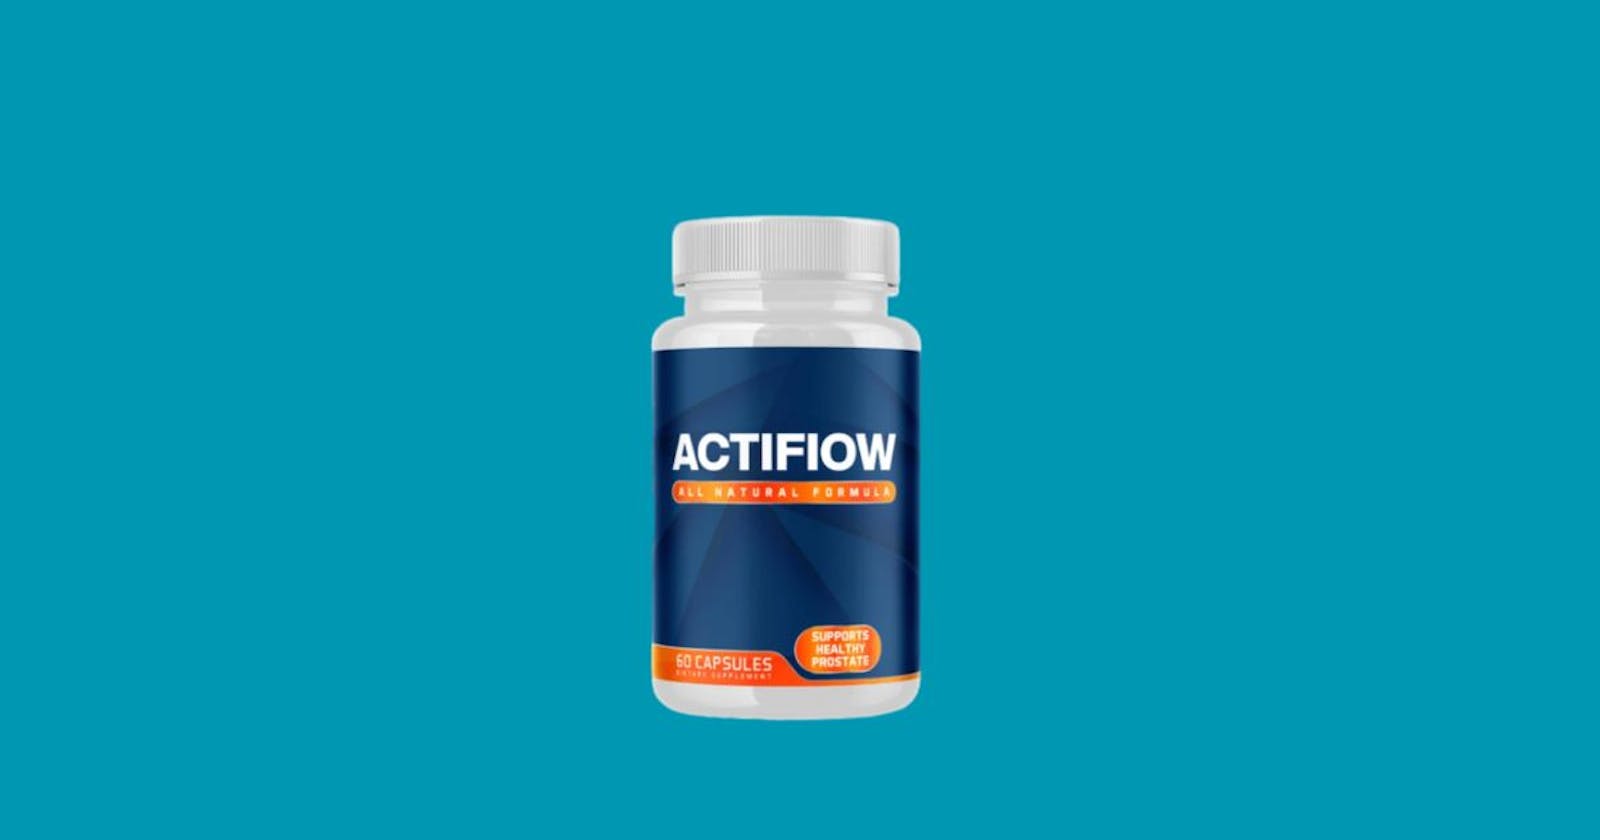 Actiflow Reviews: Does It Really Work?